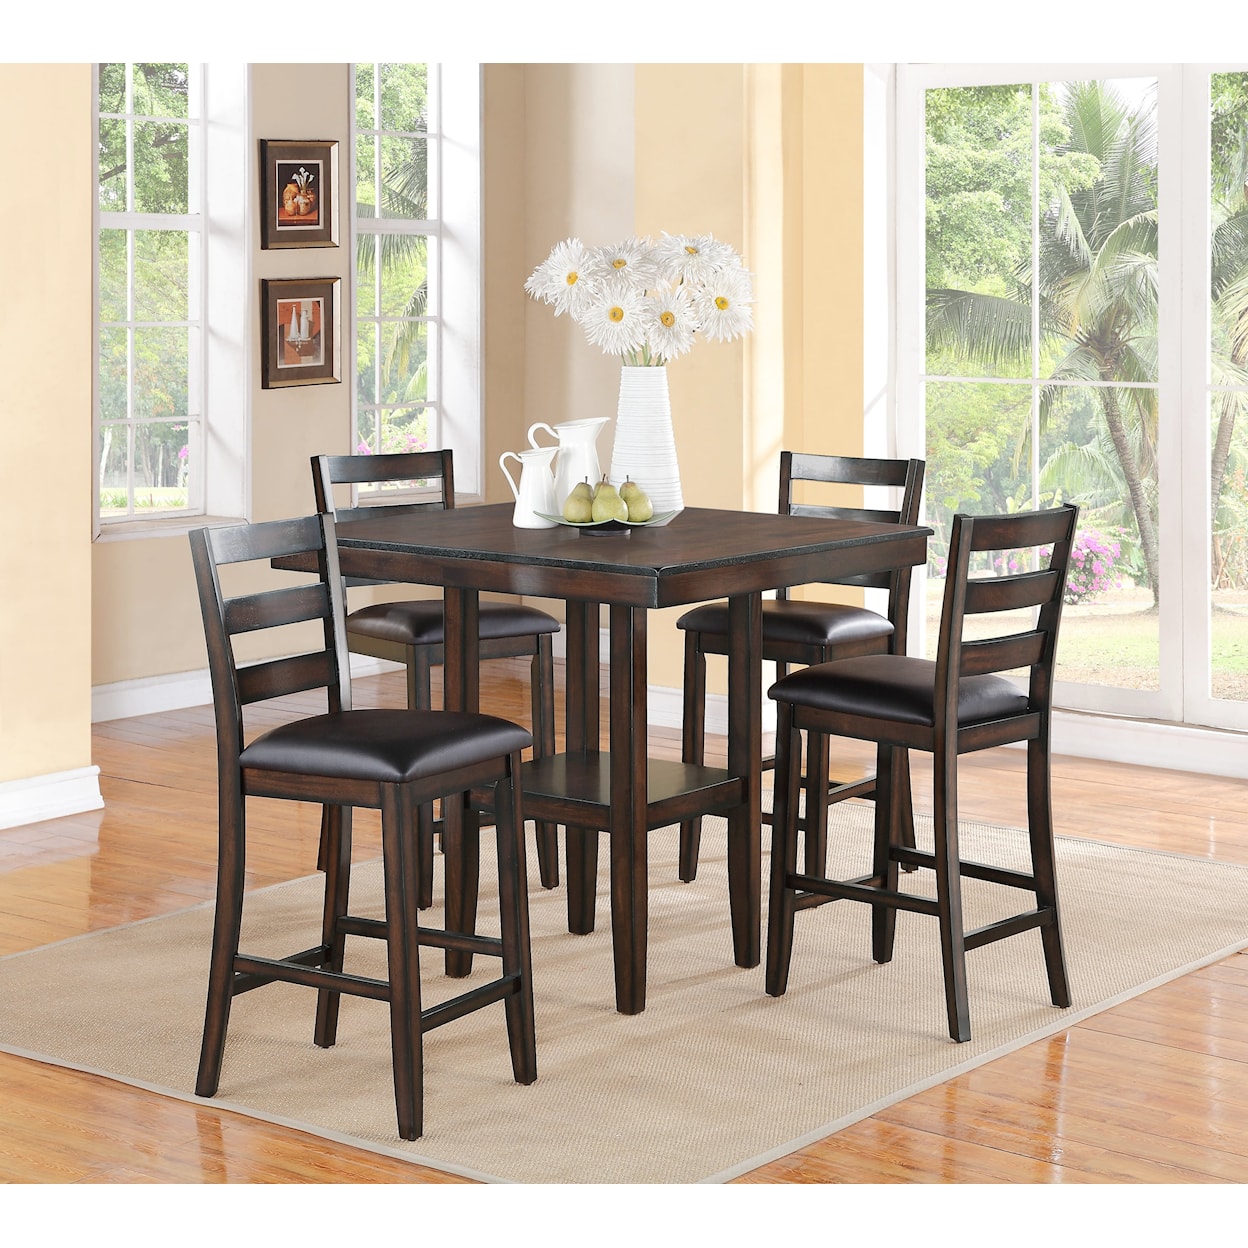 CM Tahoe 5 Piece Counter Height Table and Chairs Set